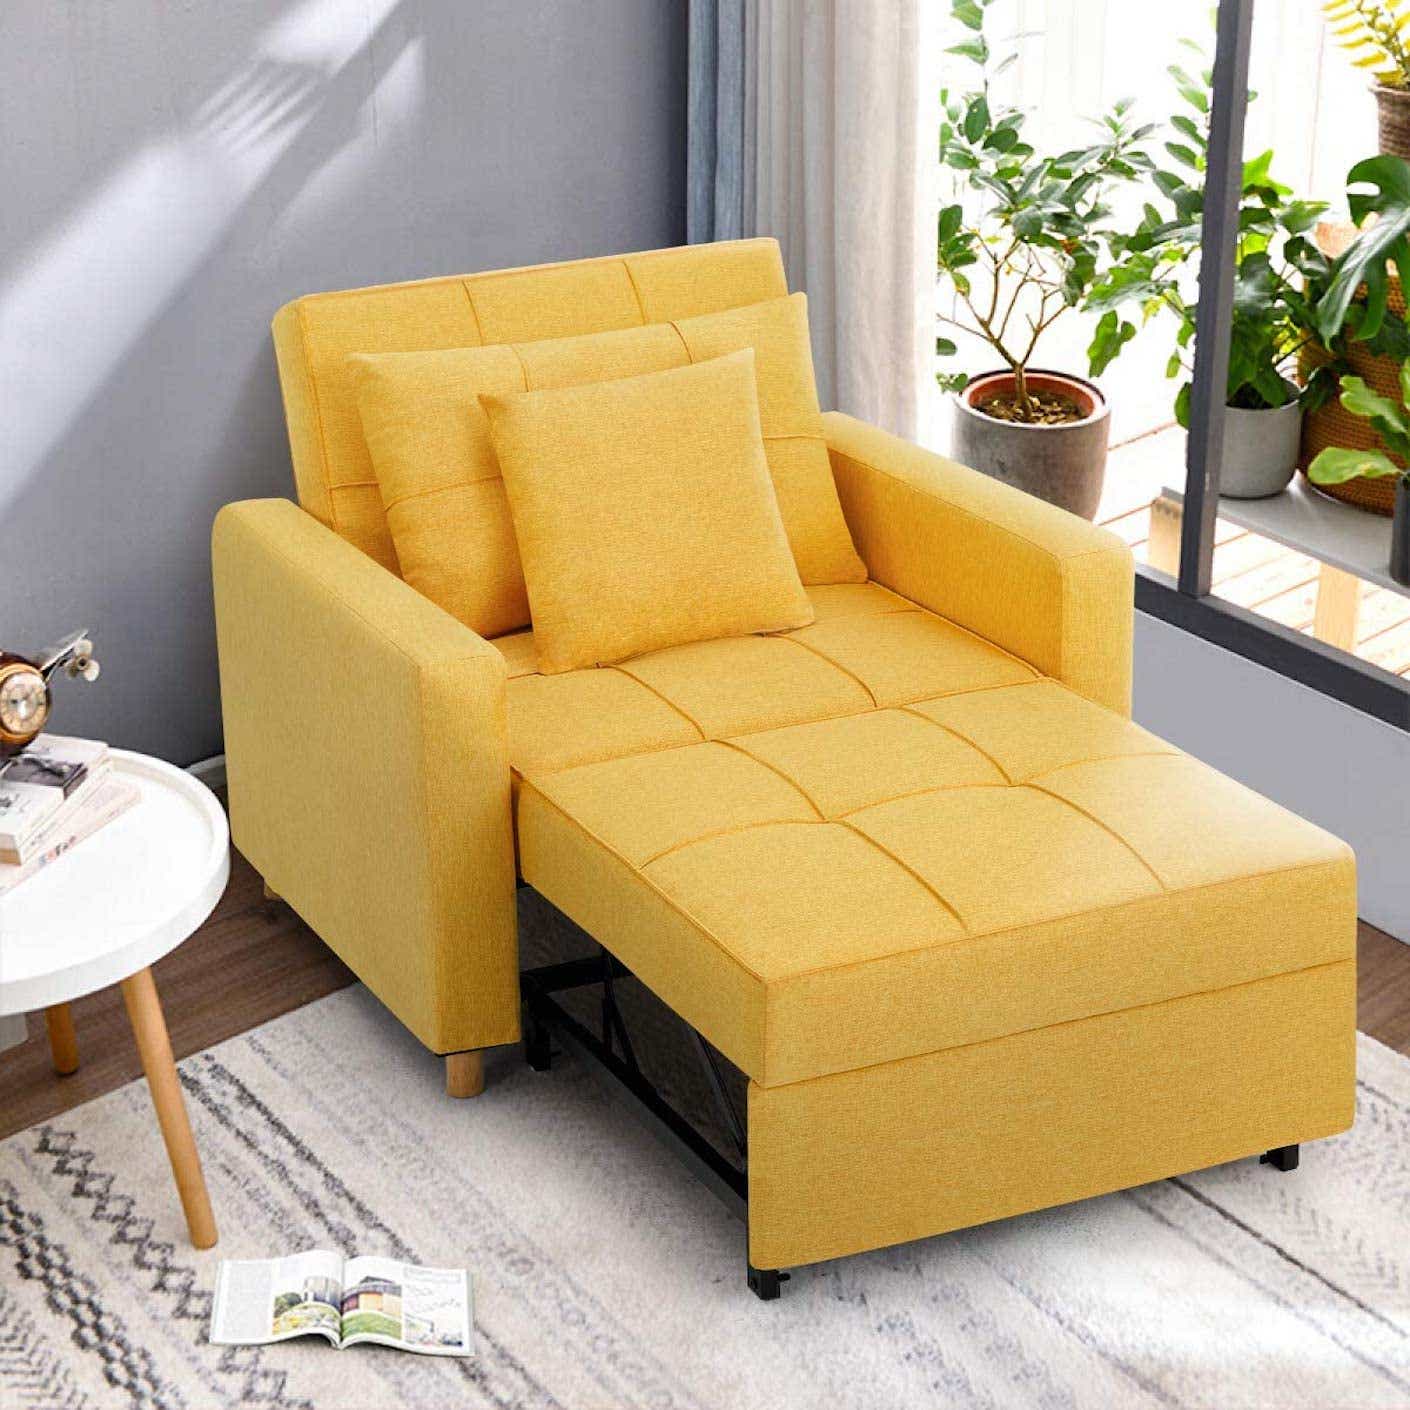 A yellow convertible chair is pulled out to be a long chair bed.